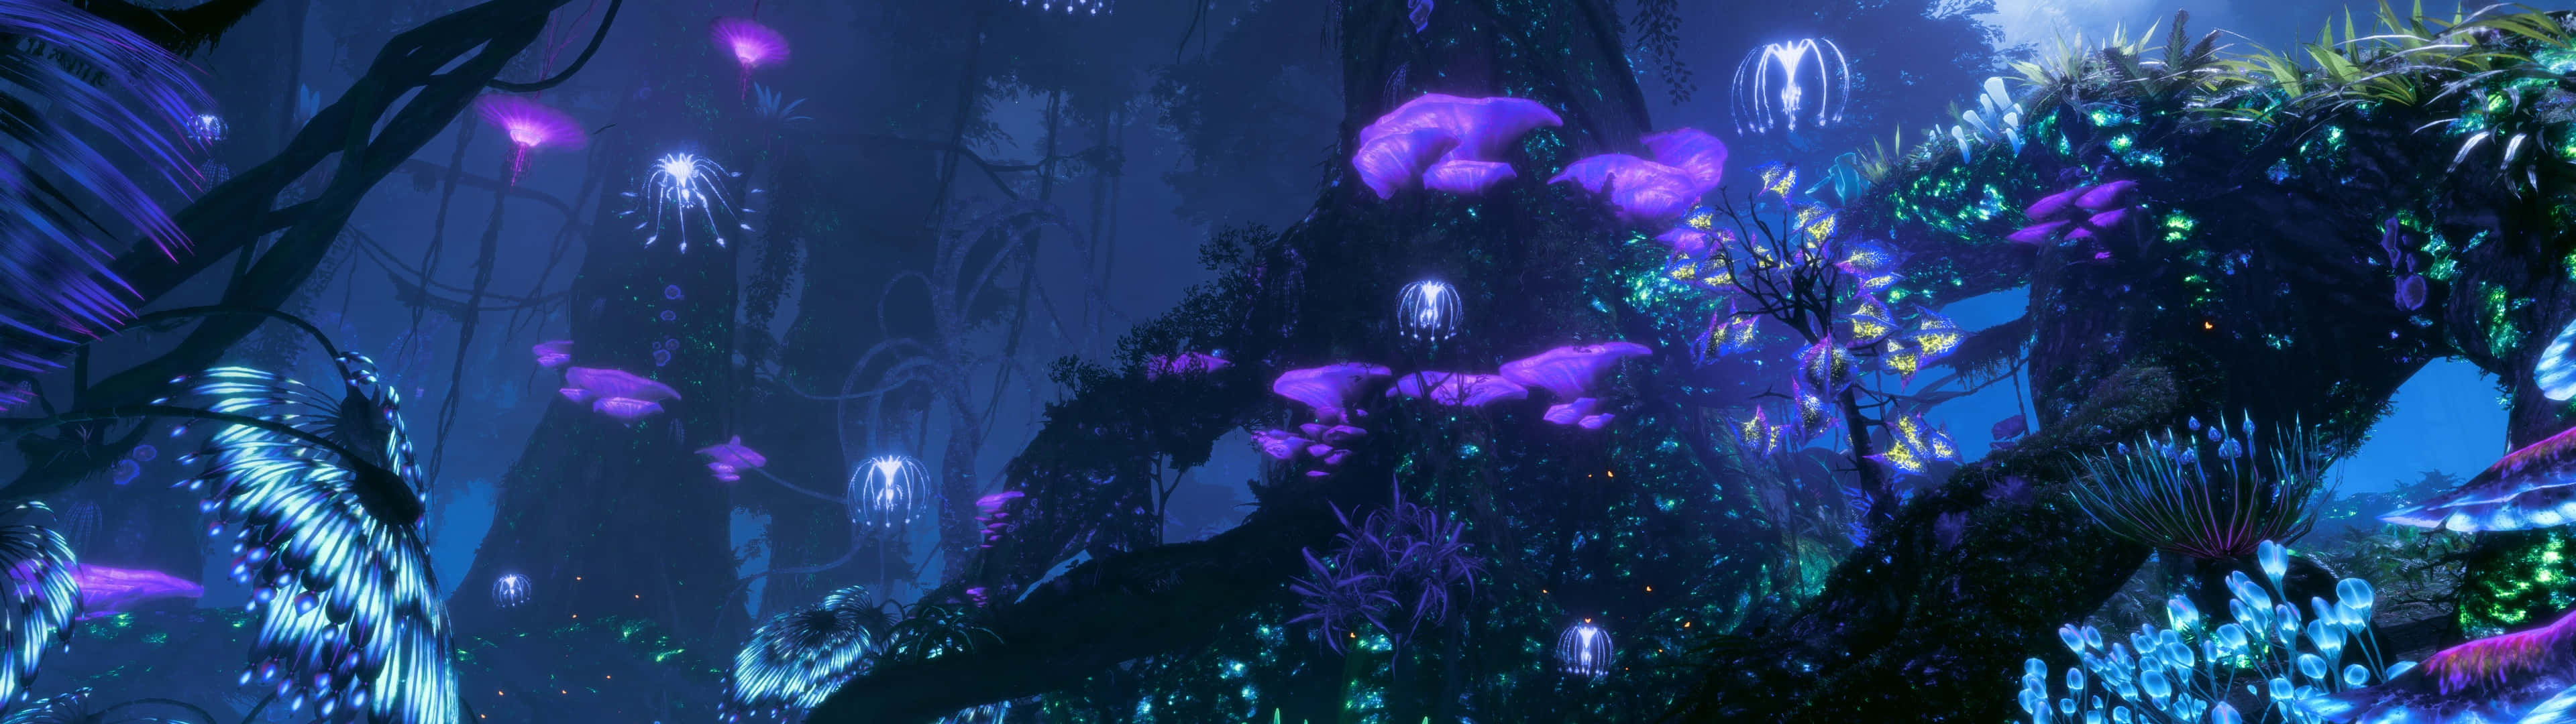 Avatar Pandora Colorful Plants And Purple Forest Wallpaper